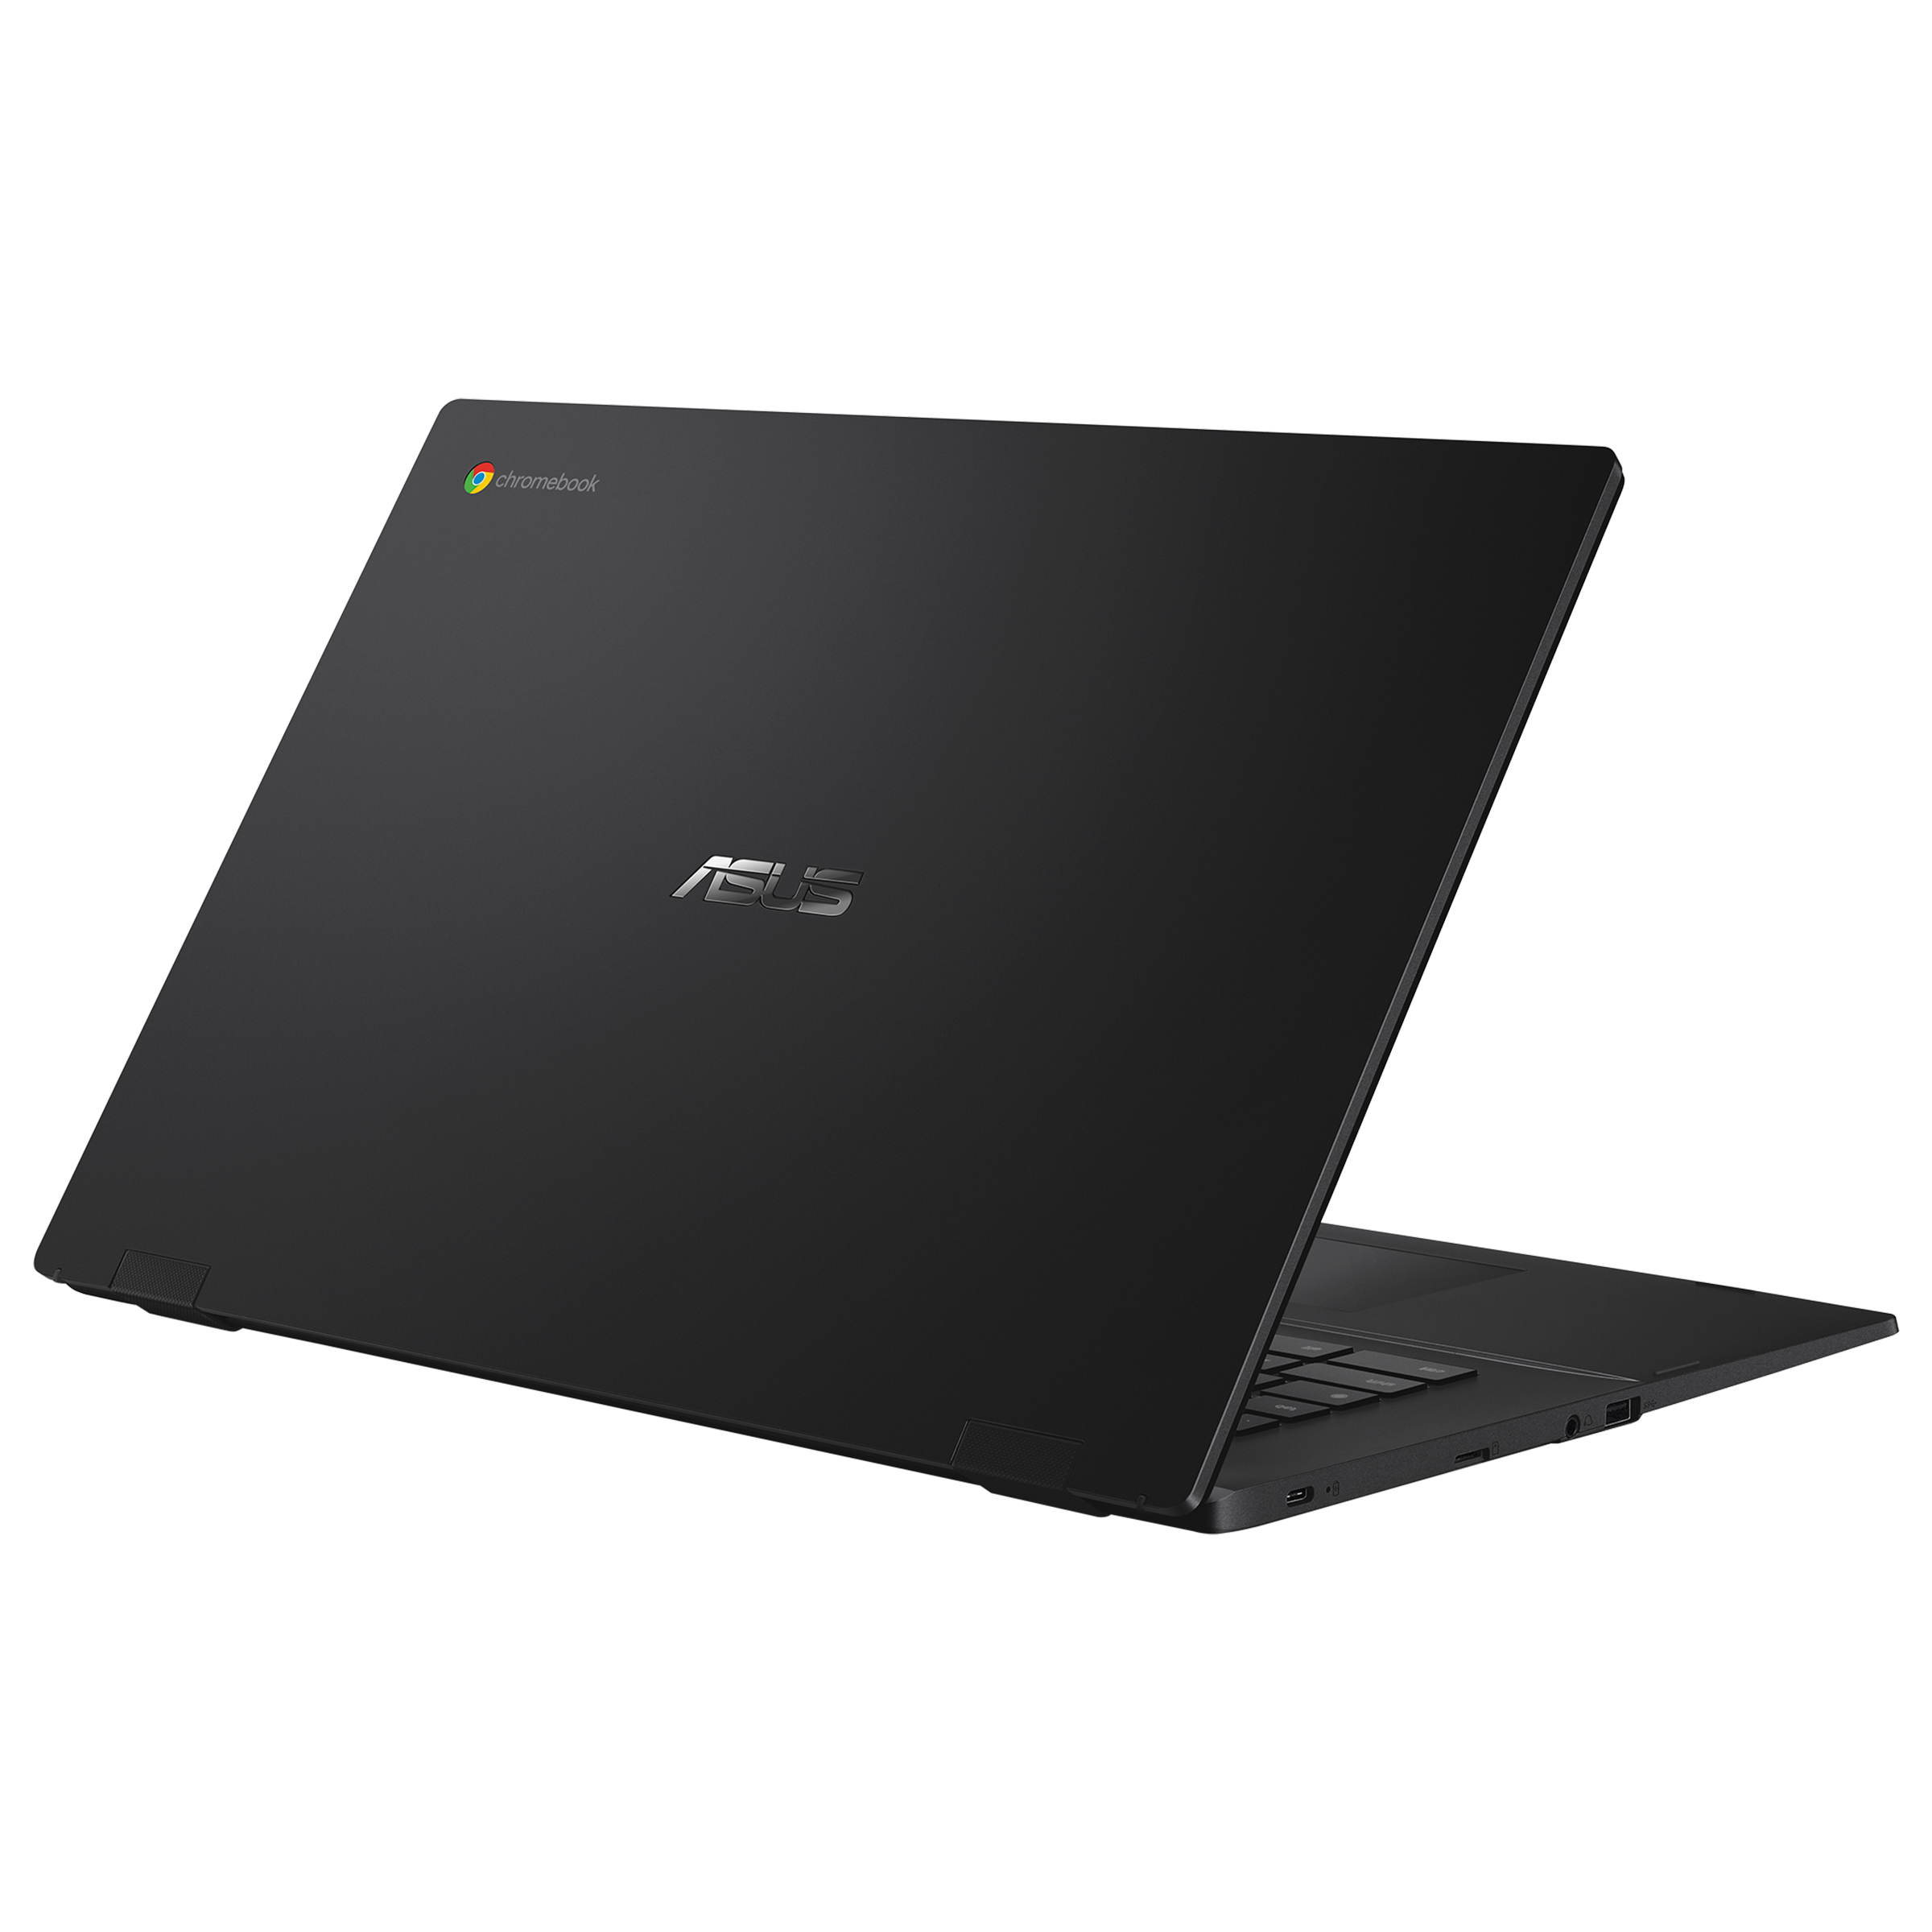 ASUS Chromebook CX1 (CX1700)｜Laptops For Home｜ASUS USA